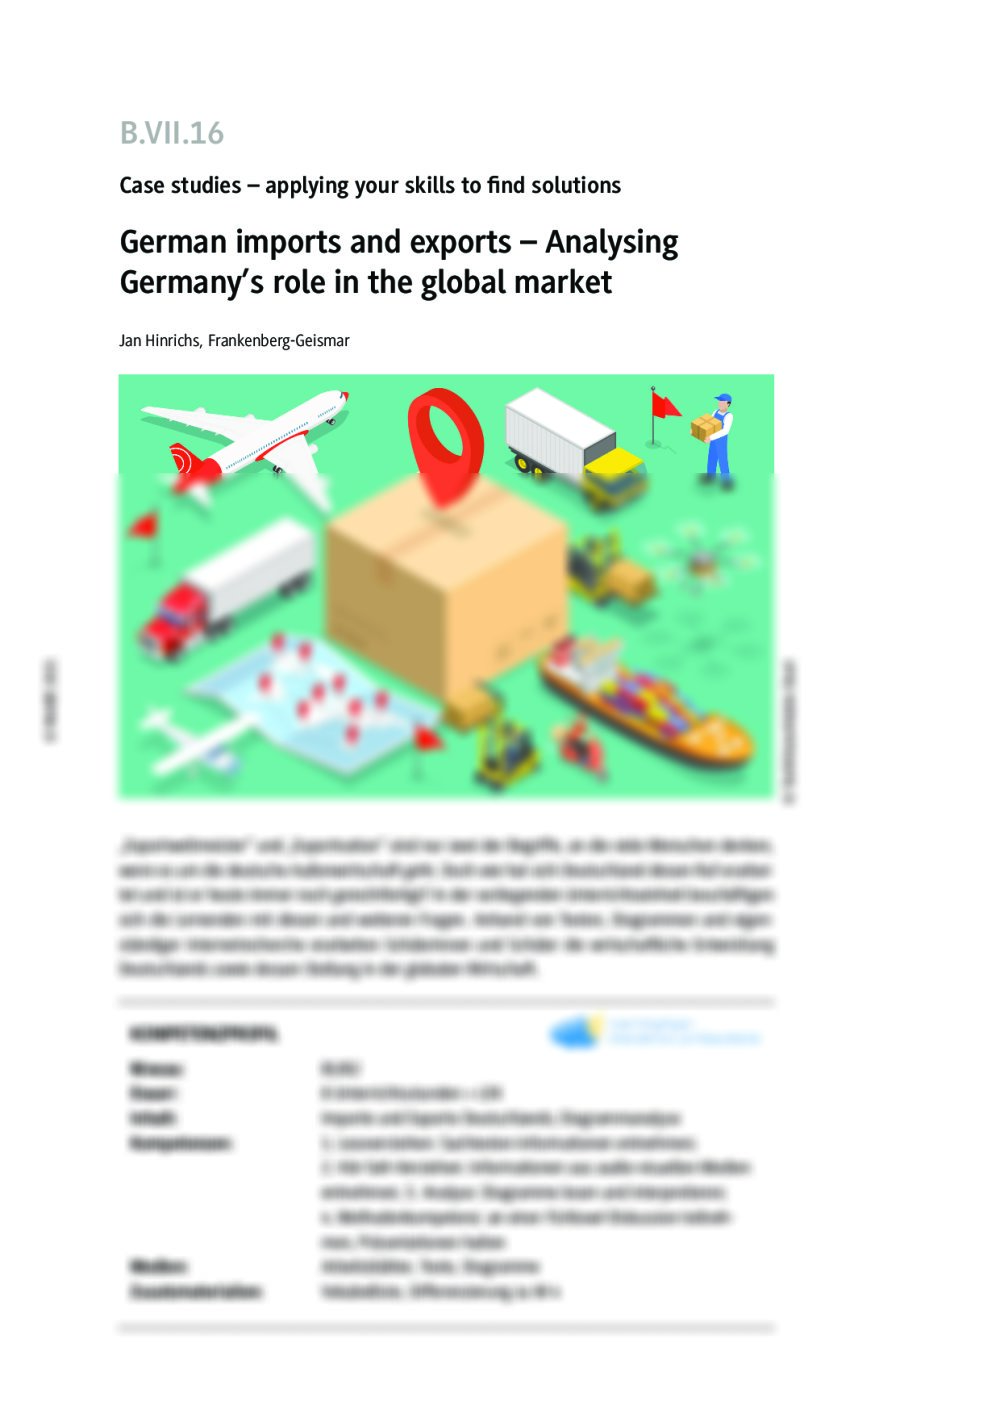 German imports and exports - Seite 1